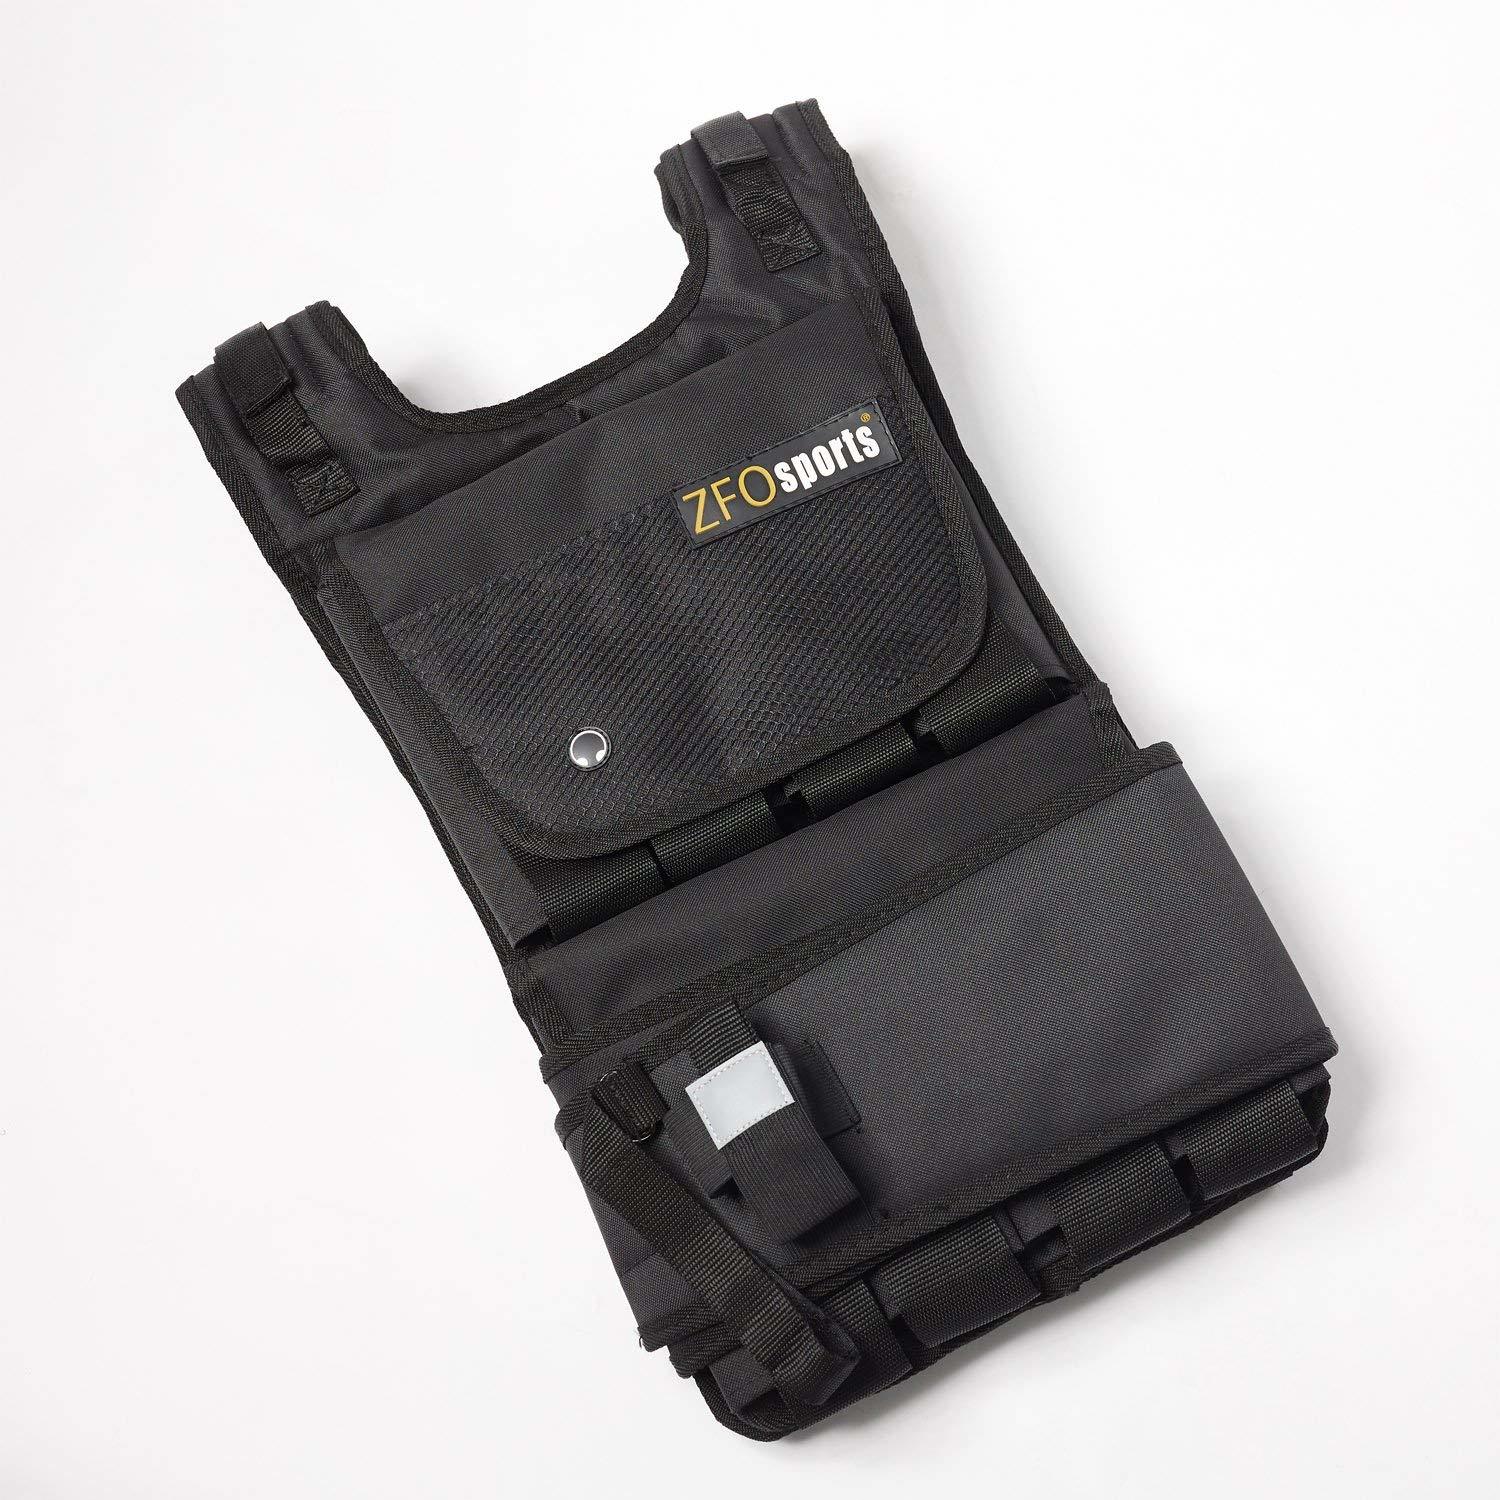 4 best weighted vests for running and crossfit that will change the way U train 7